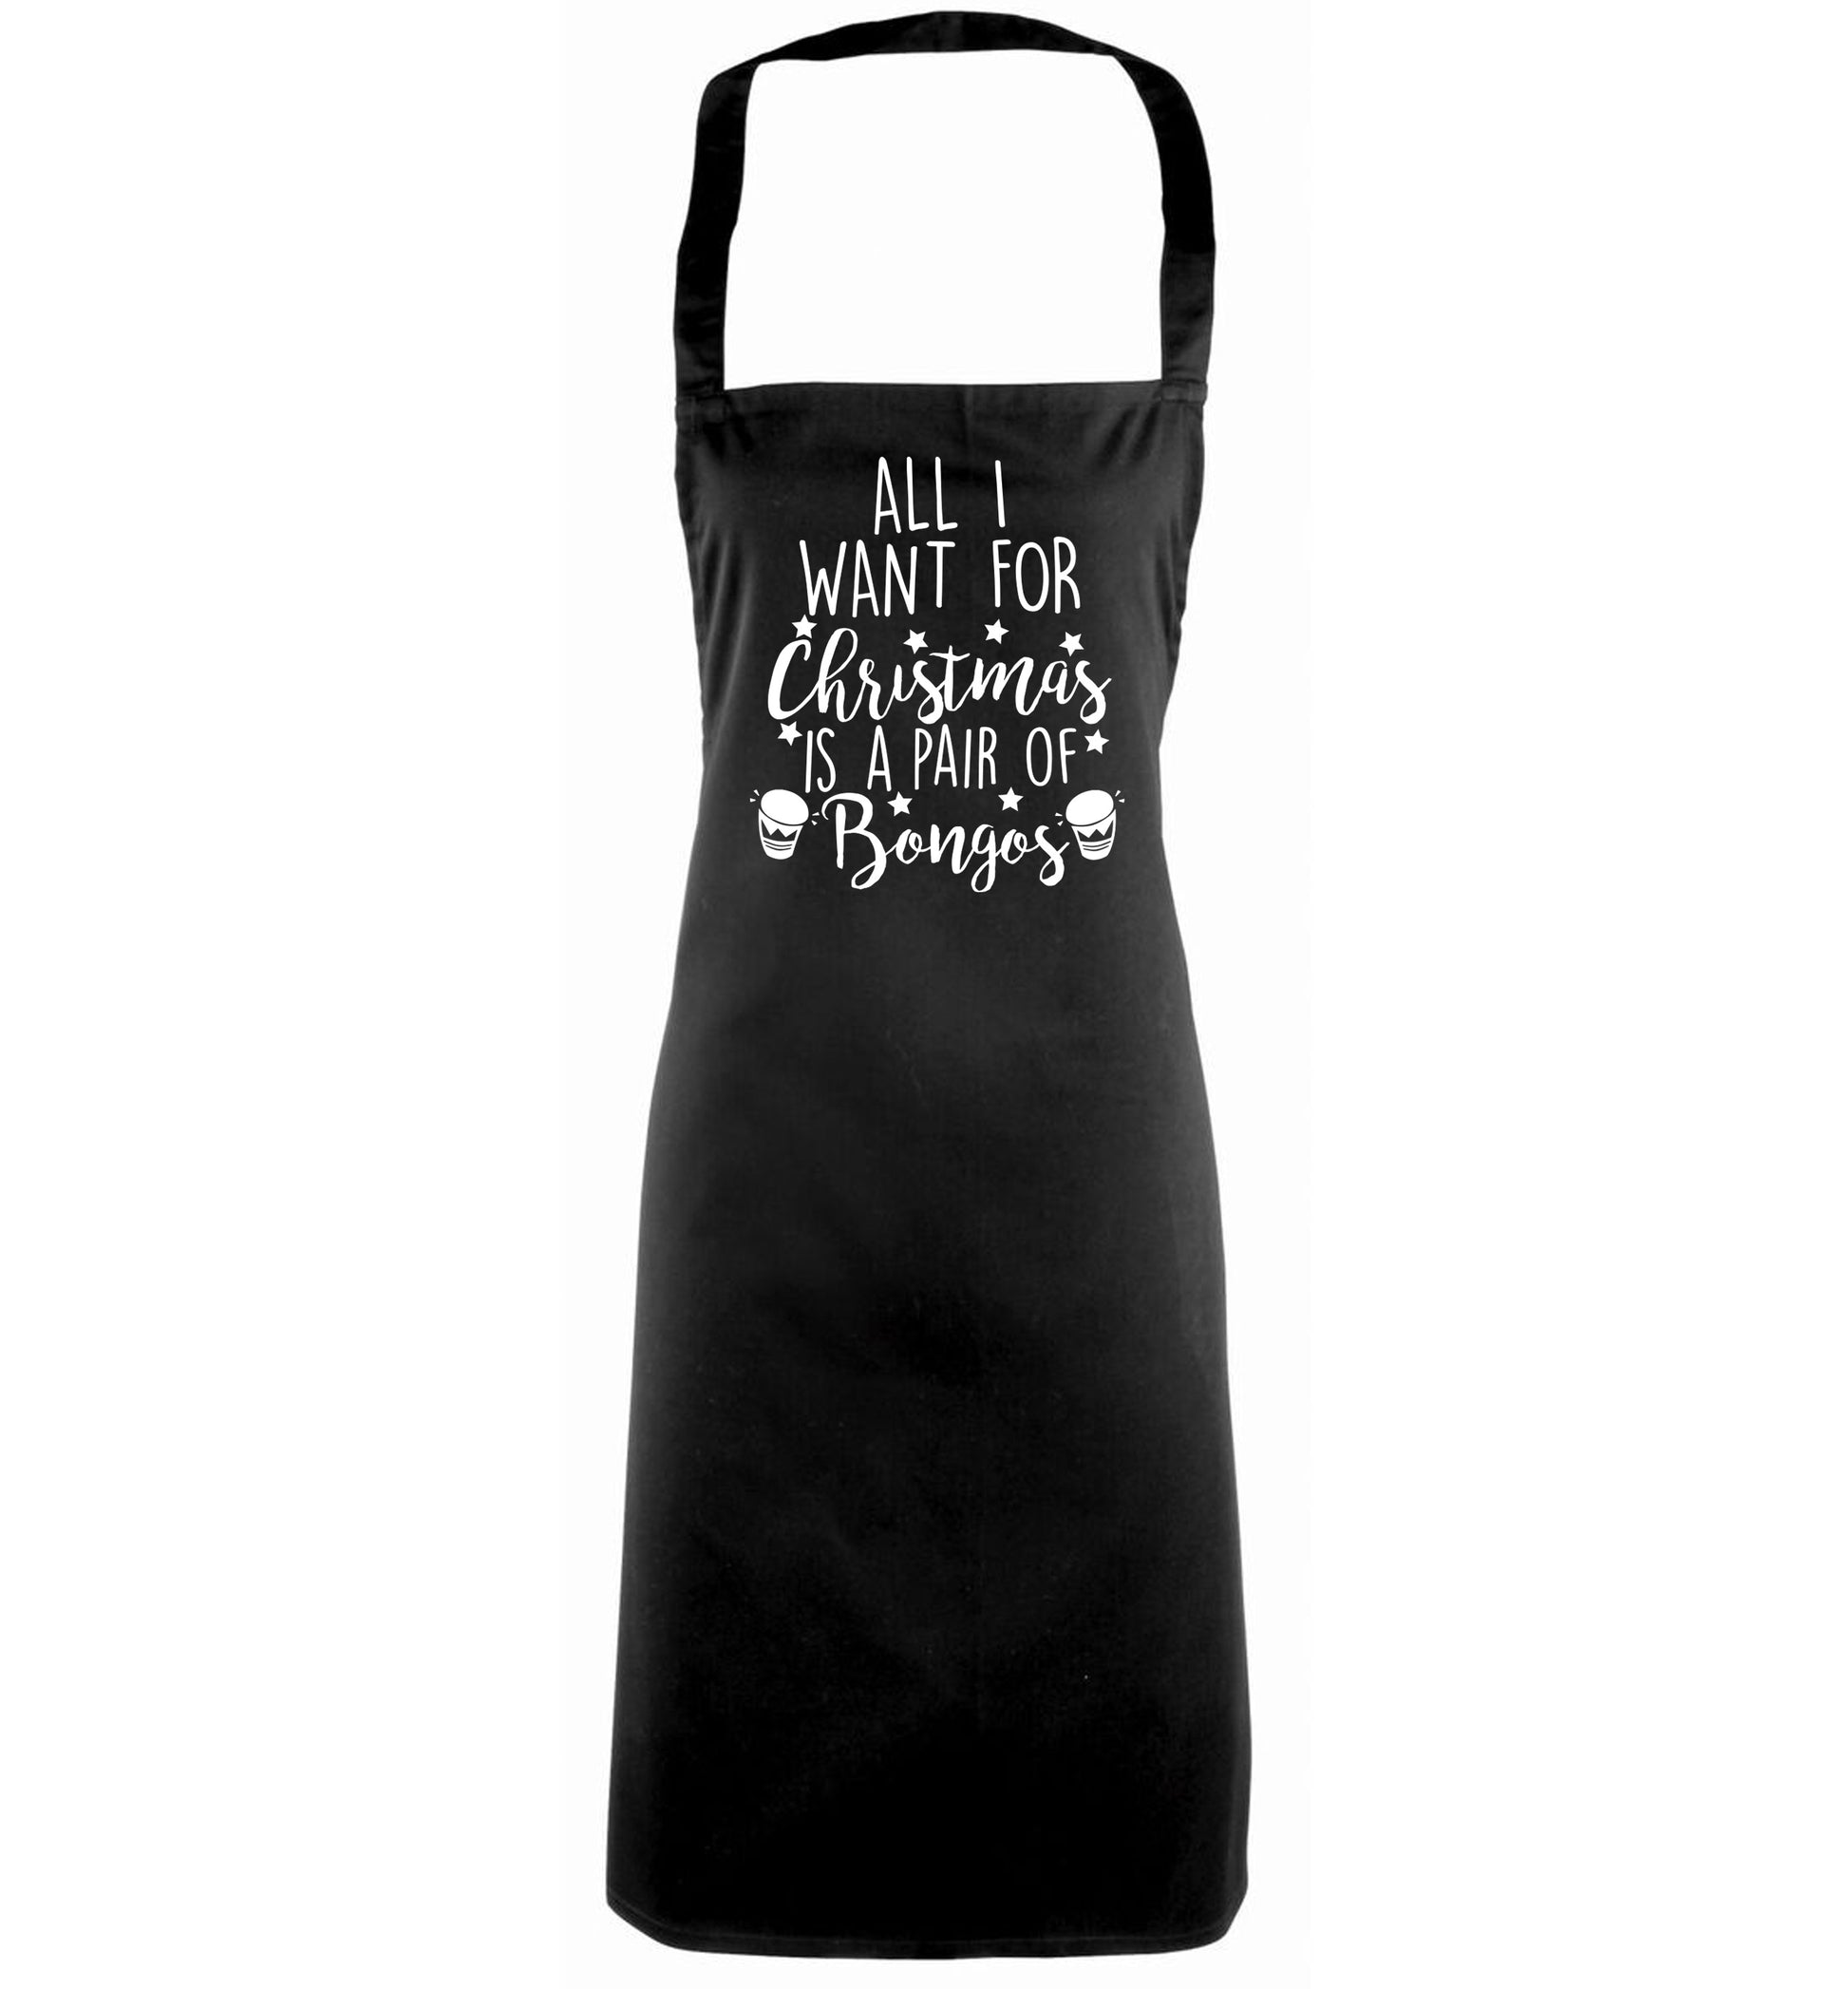 All I want for Christmas is a pair of bongos! black apron